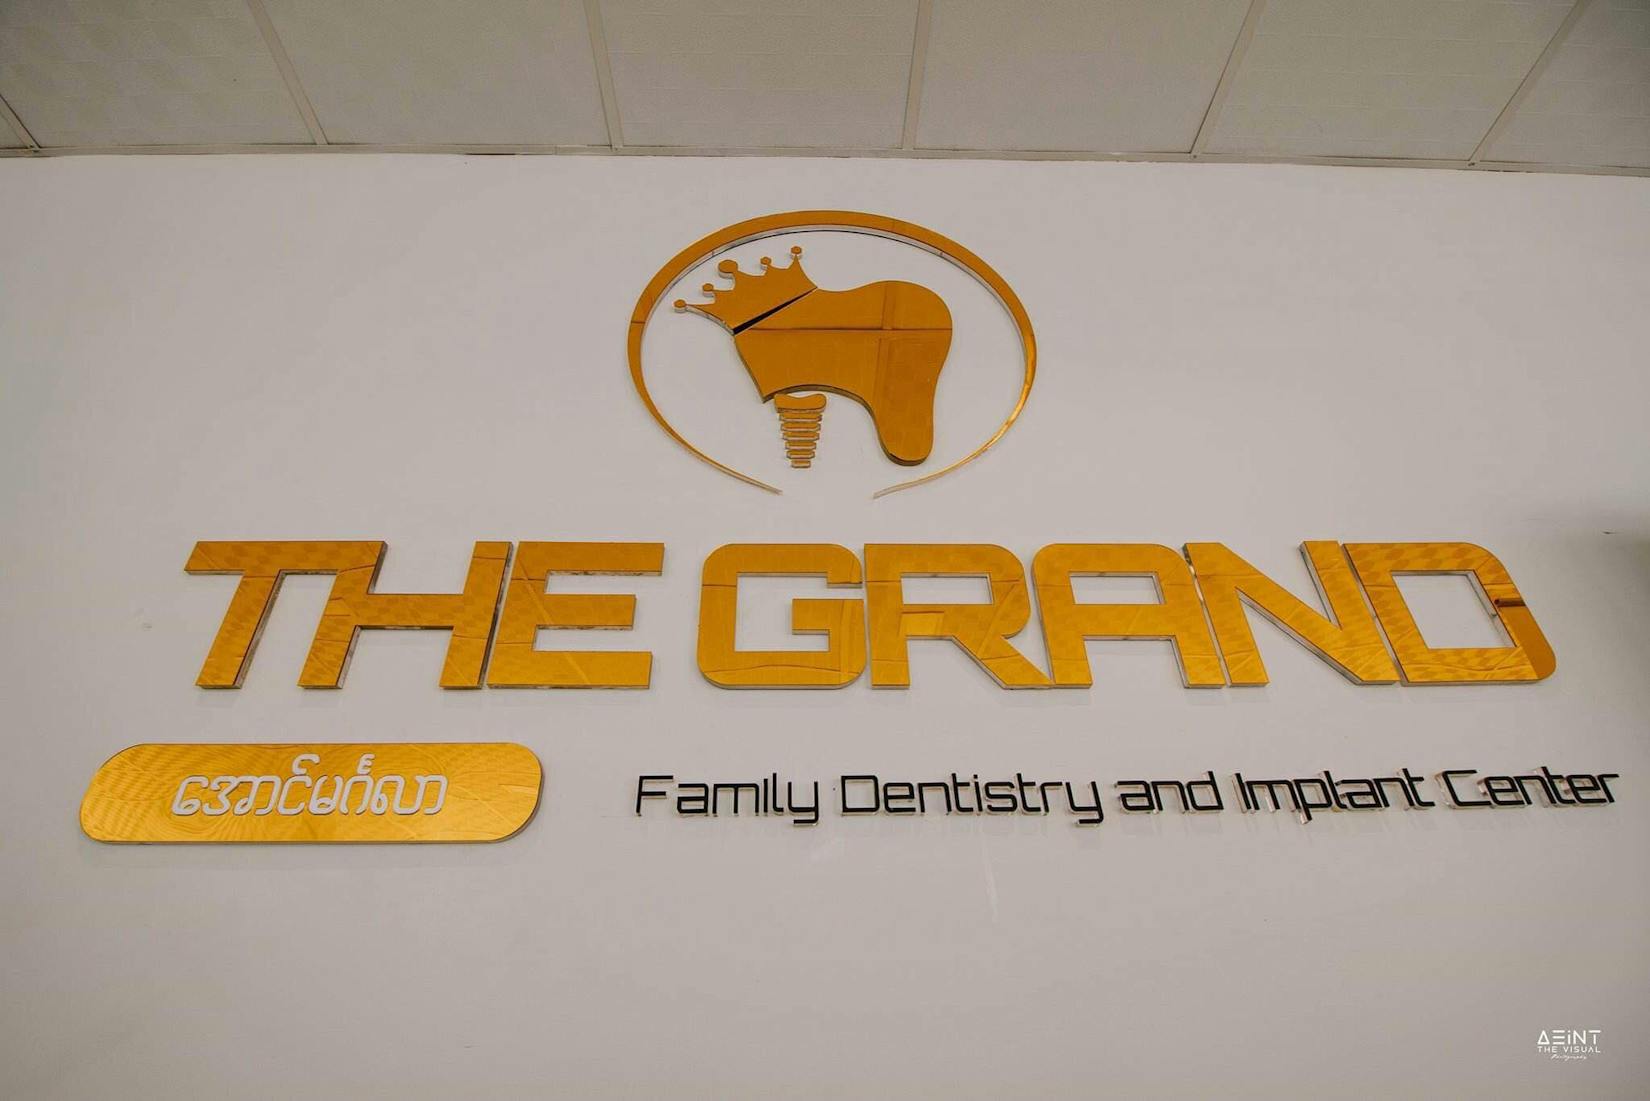 The Grand Family Dentistry and Implant Centre | Medical